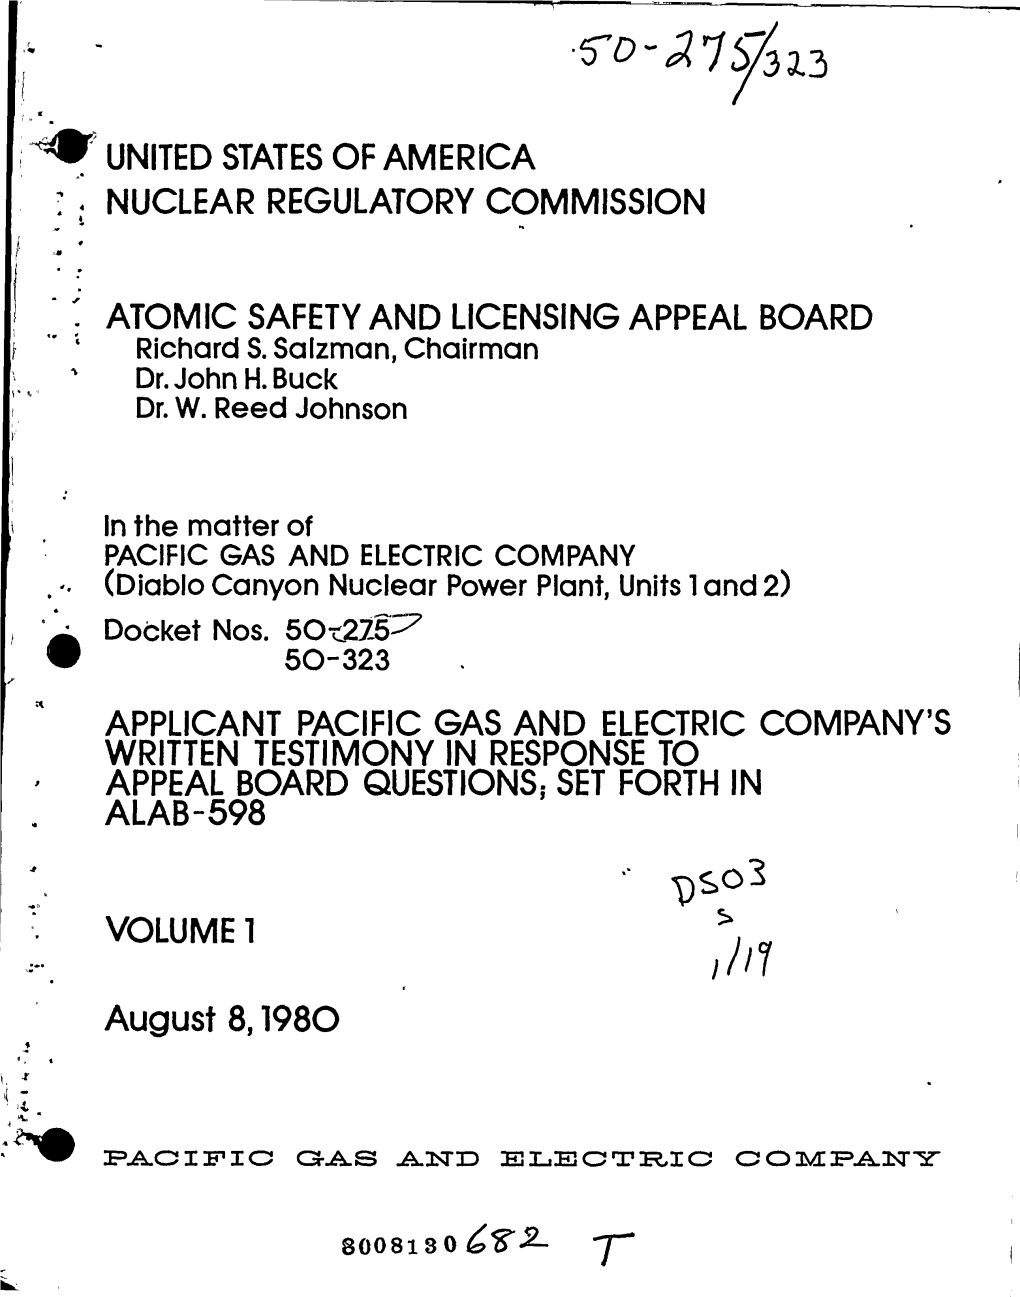 Written Testimony of JA Blume,HB Seed,S Smith & Others in Response to ALAB-598.Vols 1 & 2.Contains Tera Corp Aug 1980 Fi